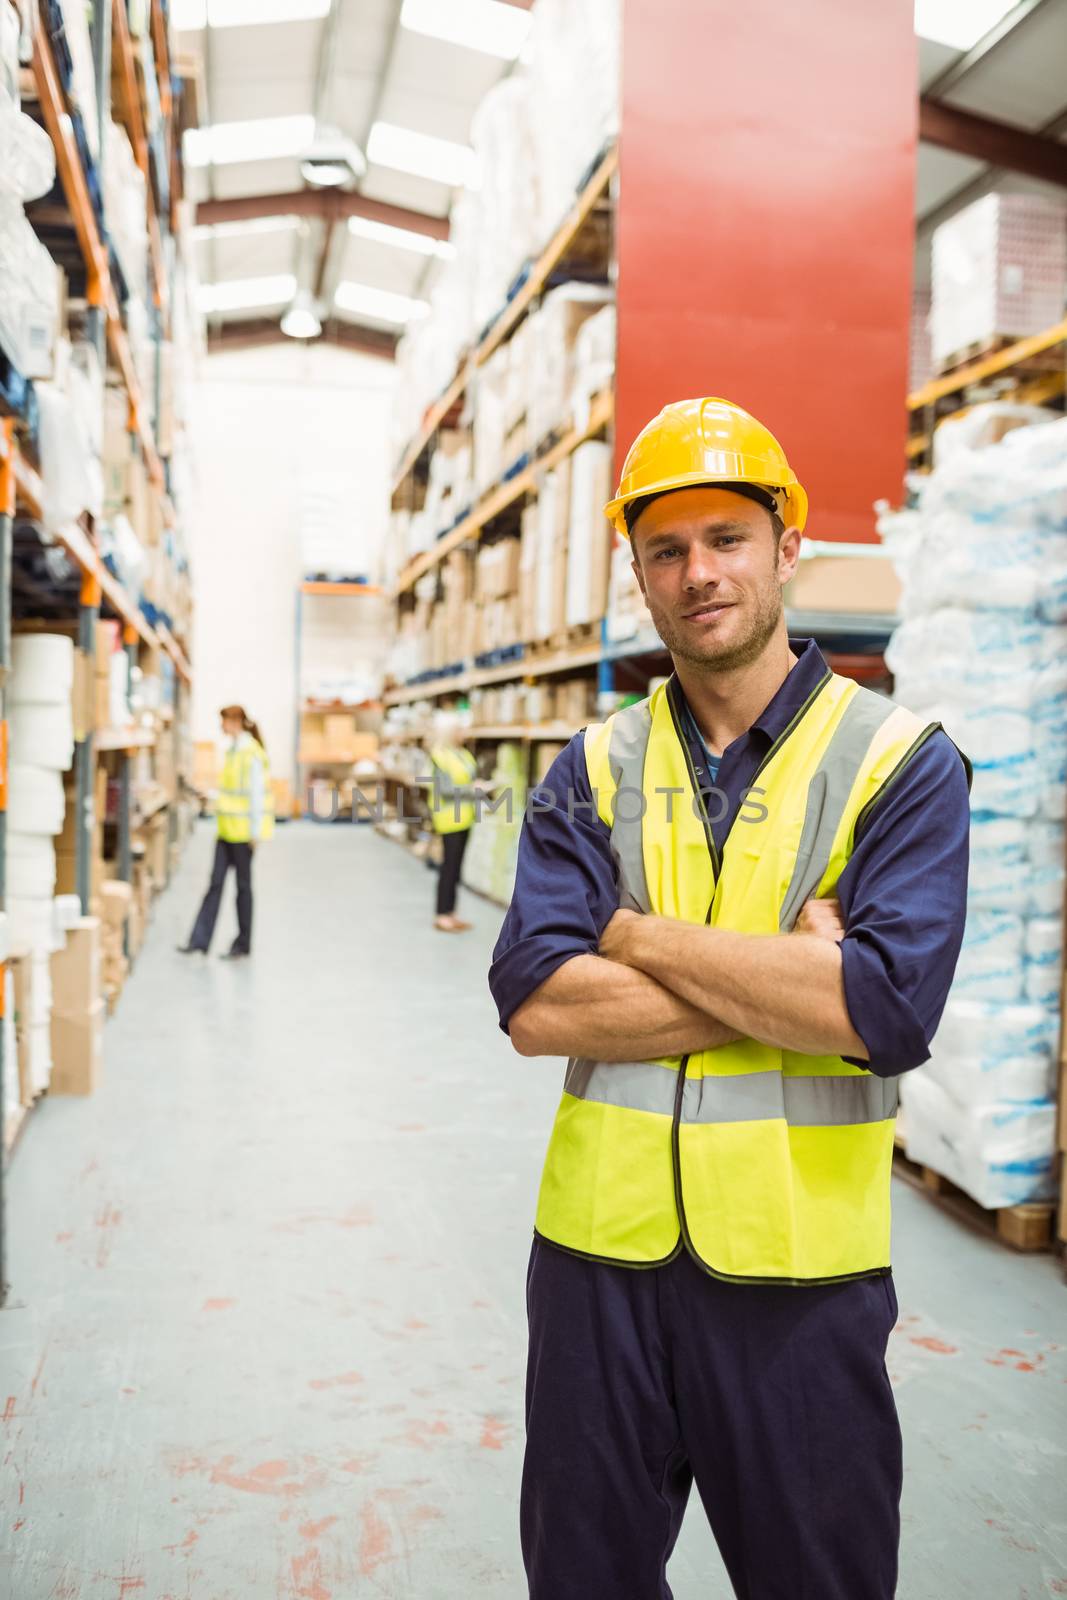 Warehouse worker smiling at camera with arms crossed by Wavebreakmedia